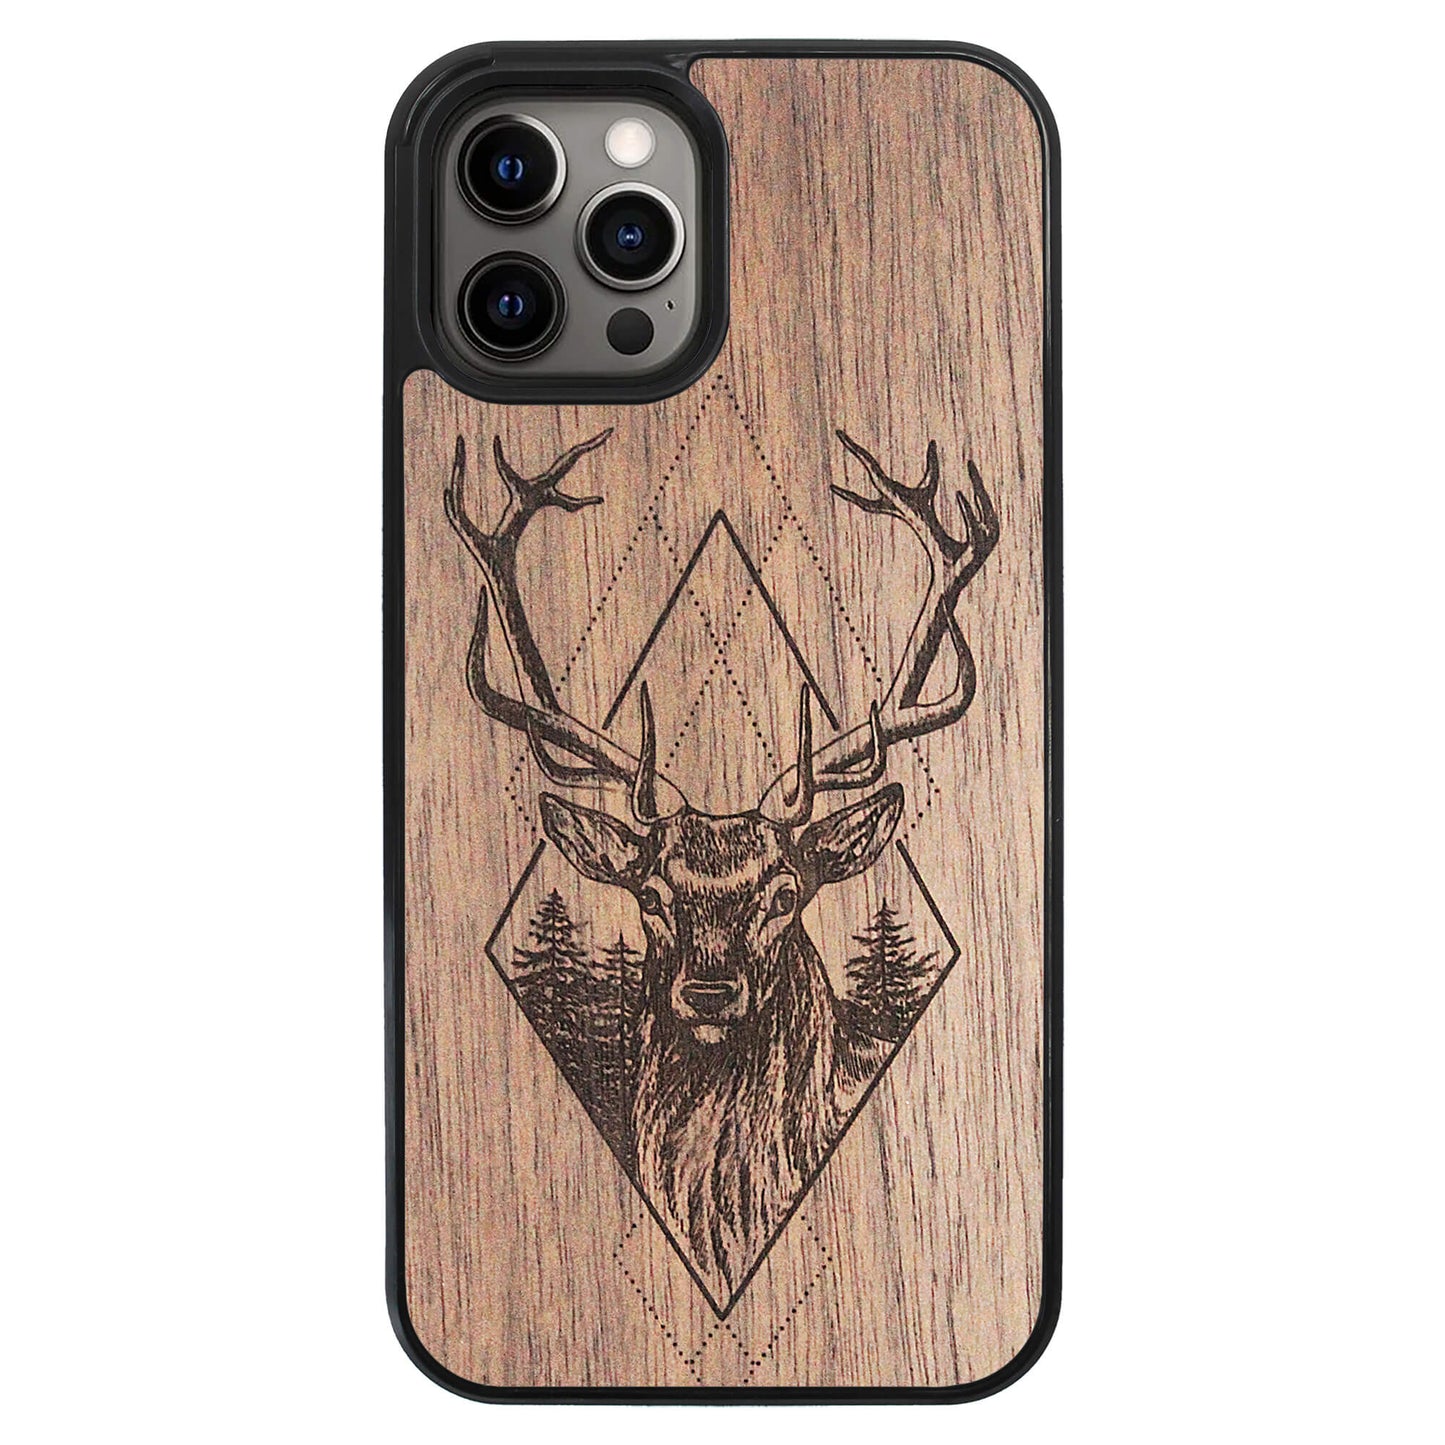 Wooden Case for iPhone 12 Pro Max Deer